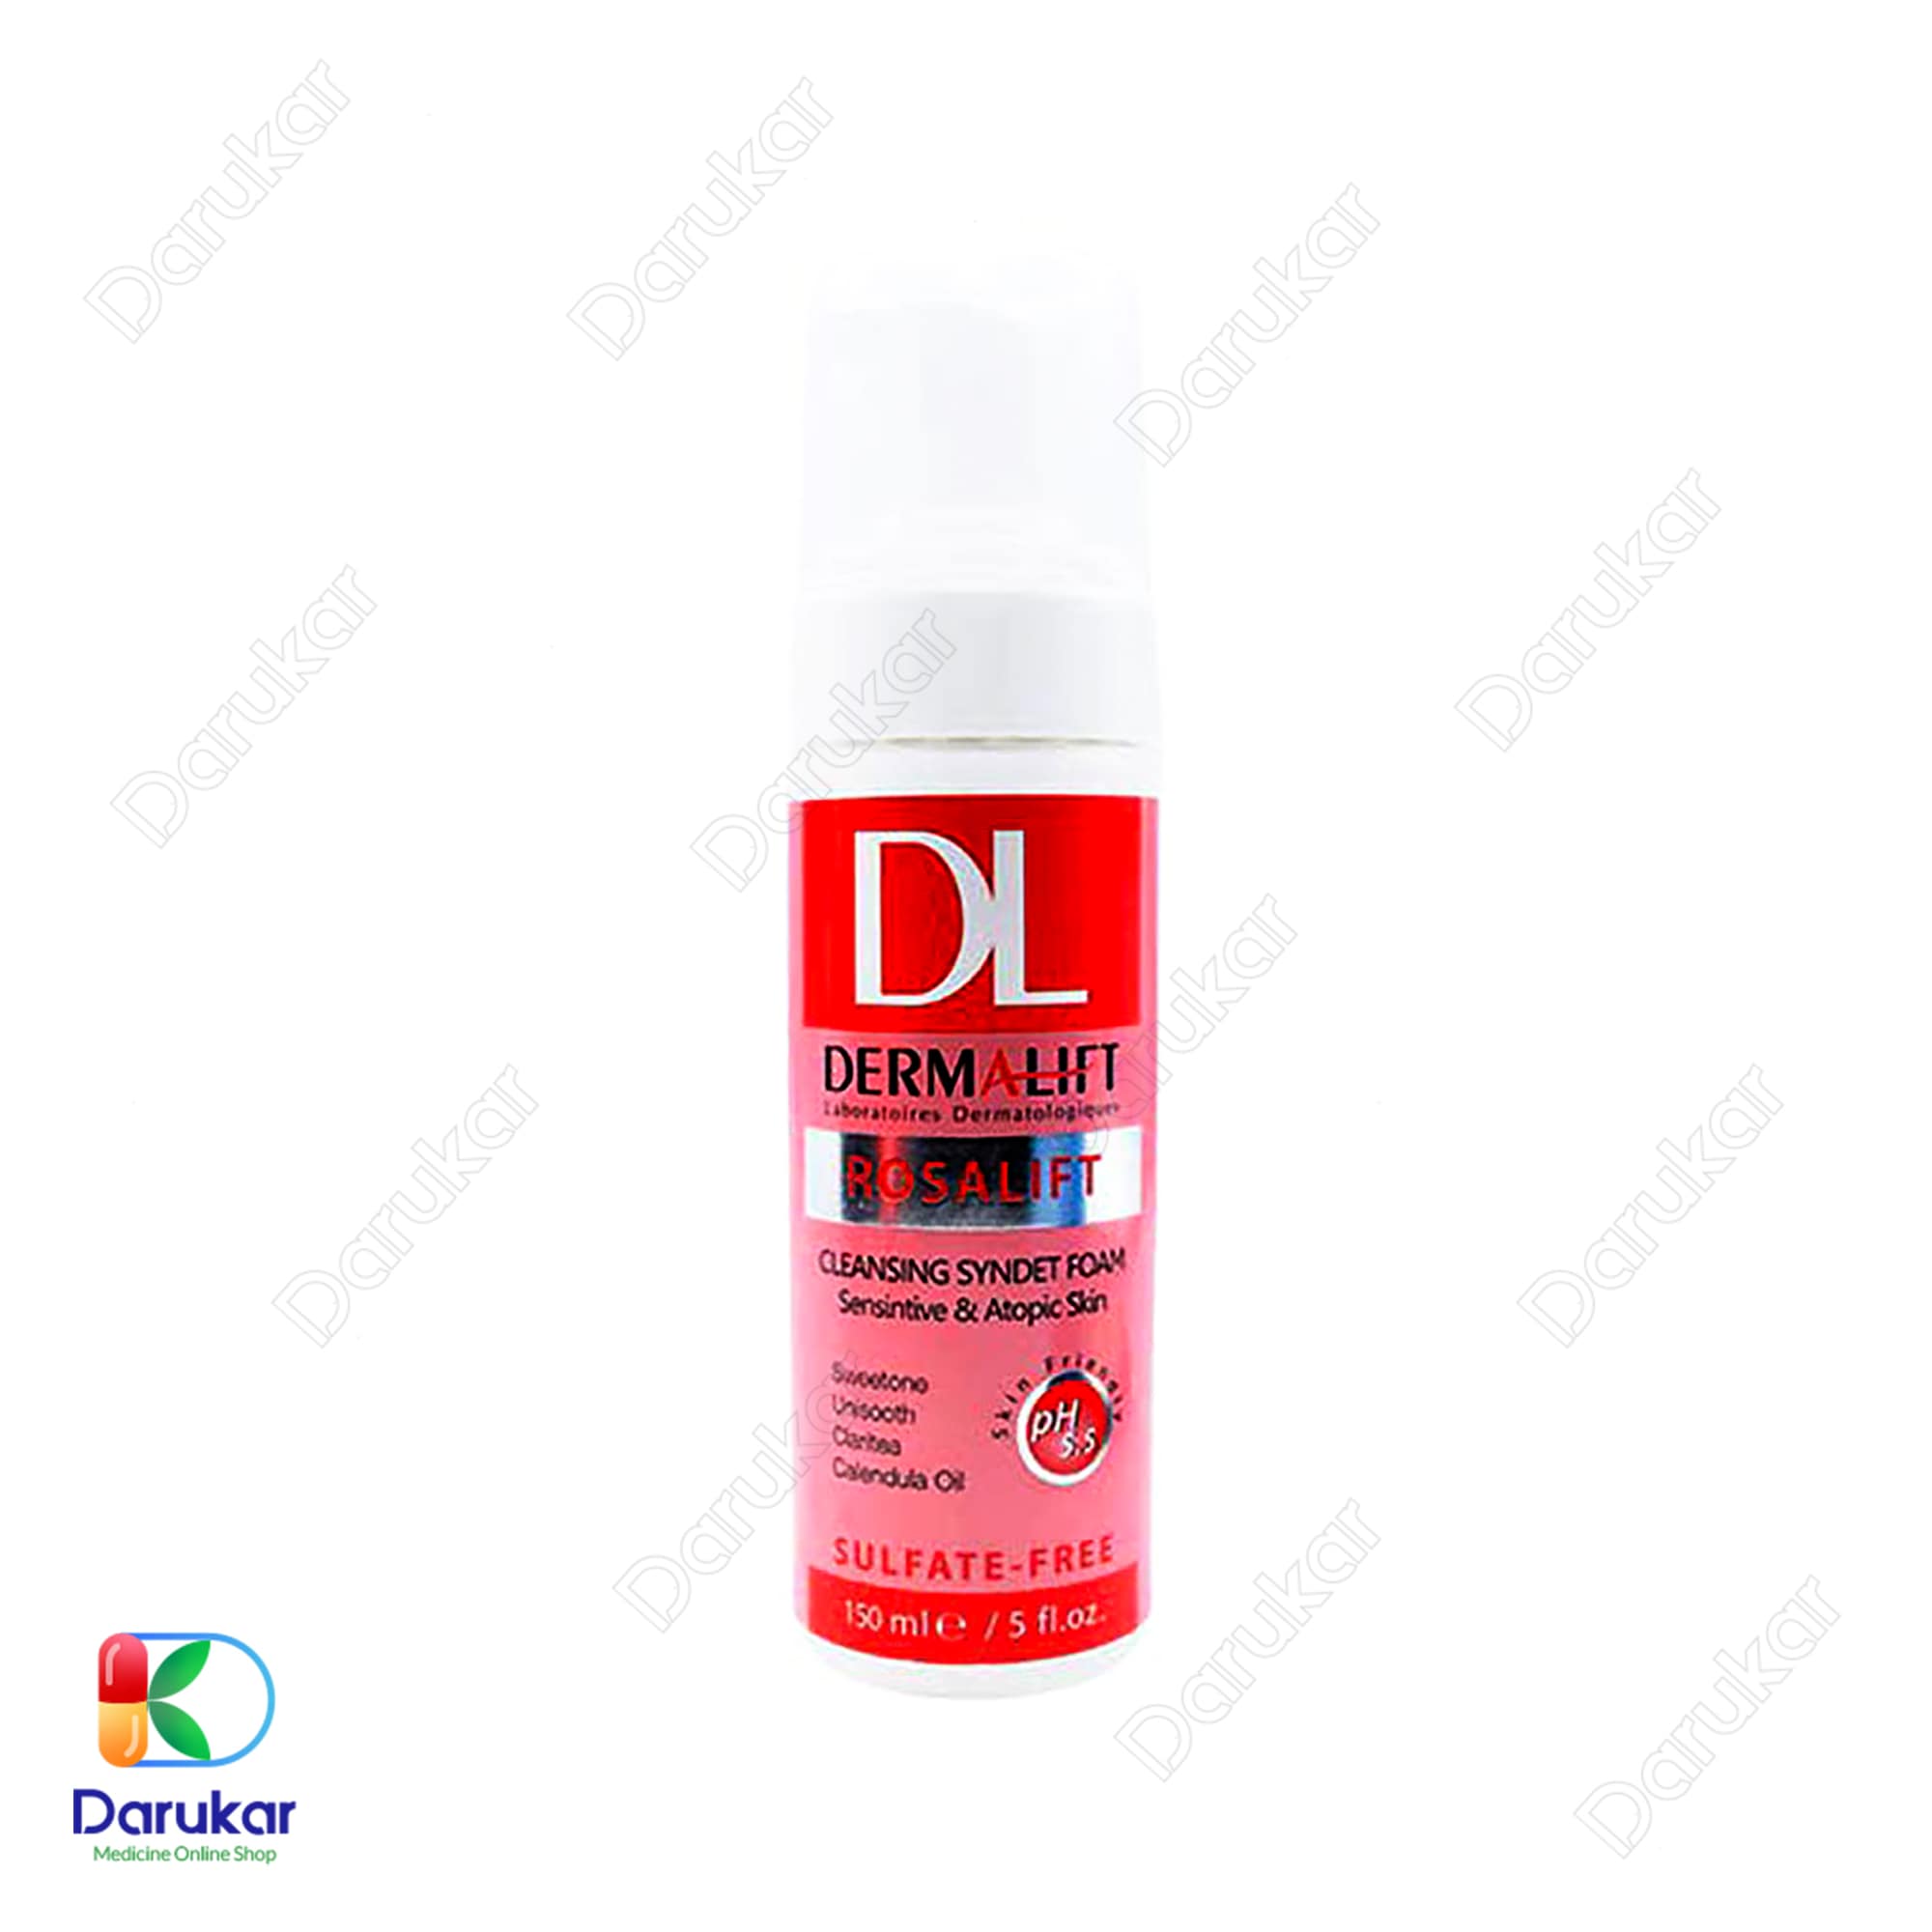 Dermalift Rosalift Cleaning Syndet Foam for Sensitive and Atopic Skin 2